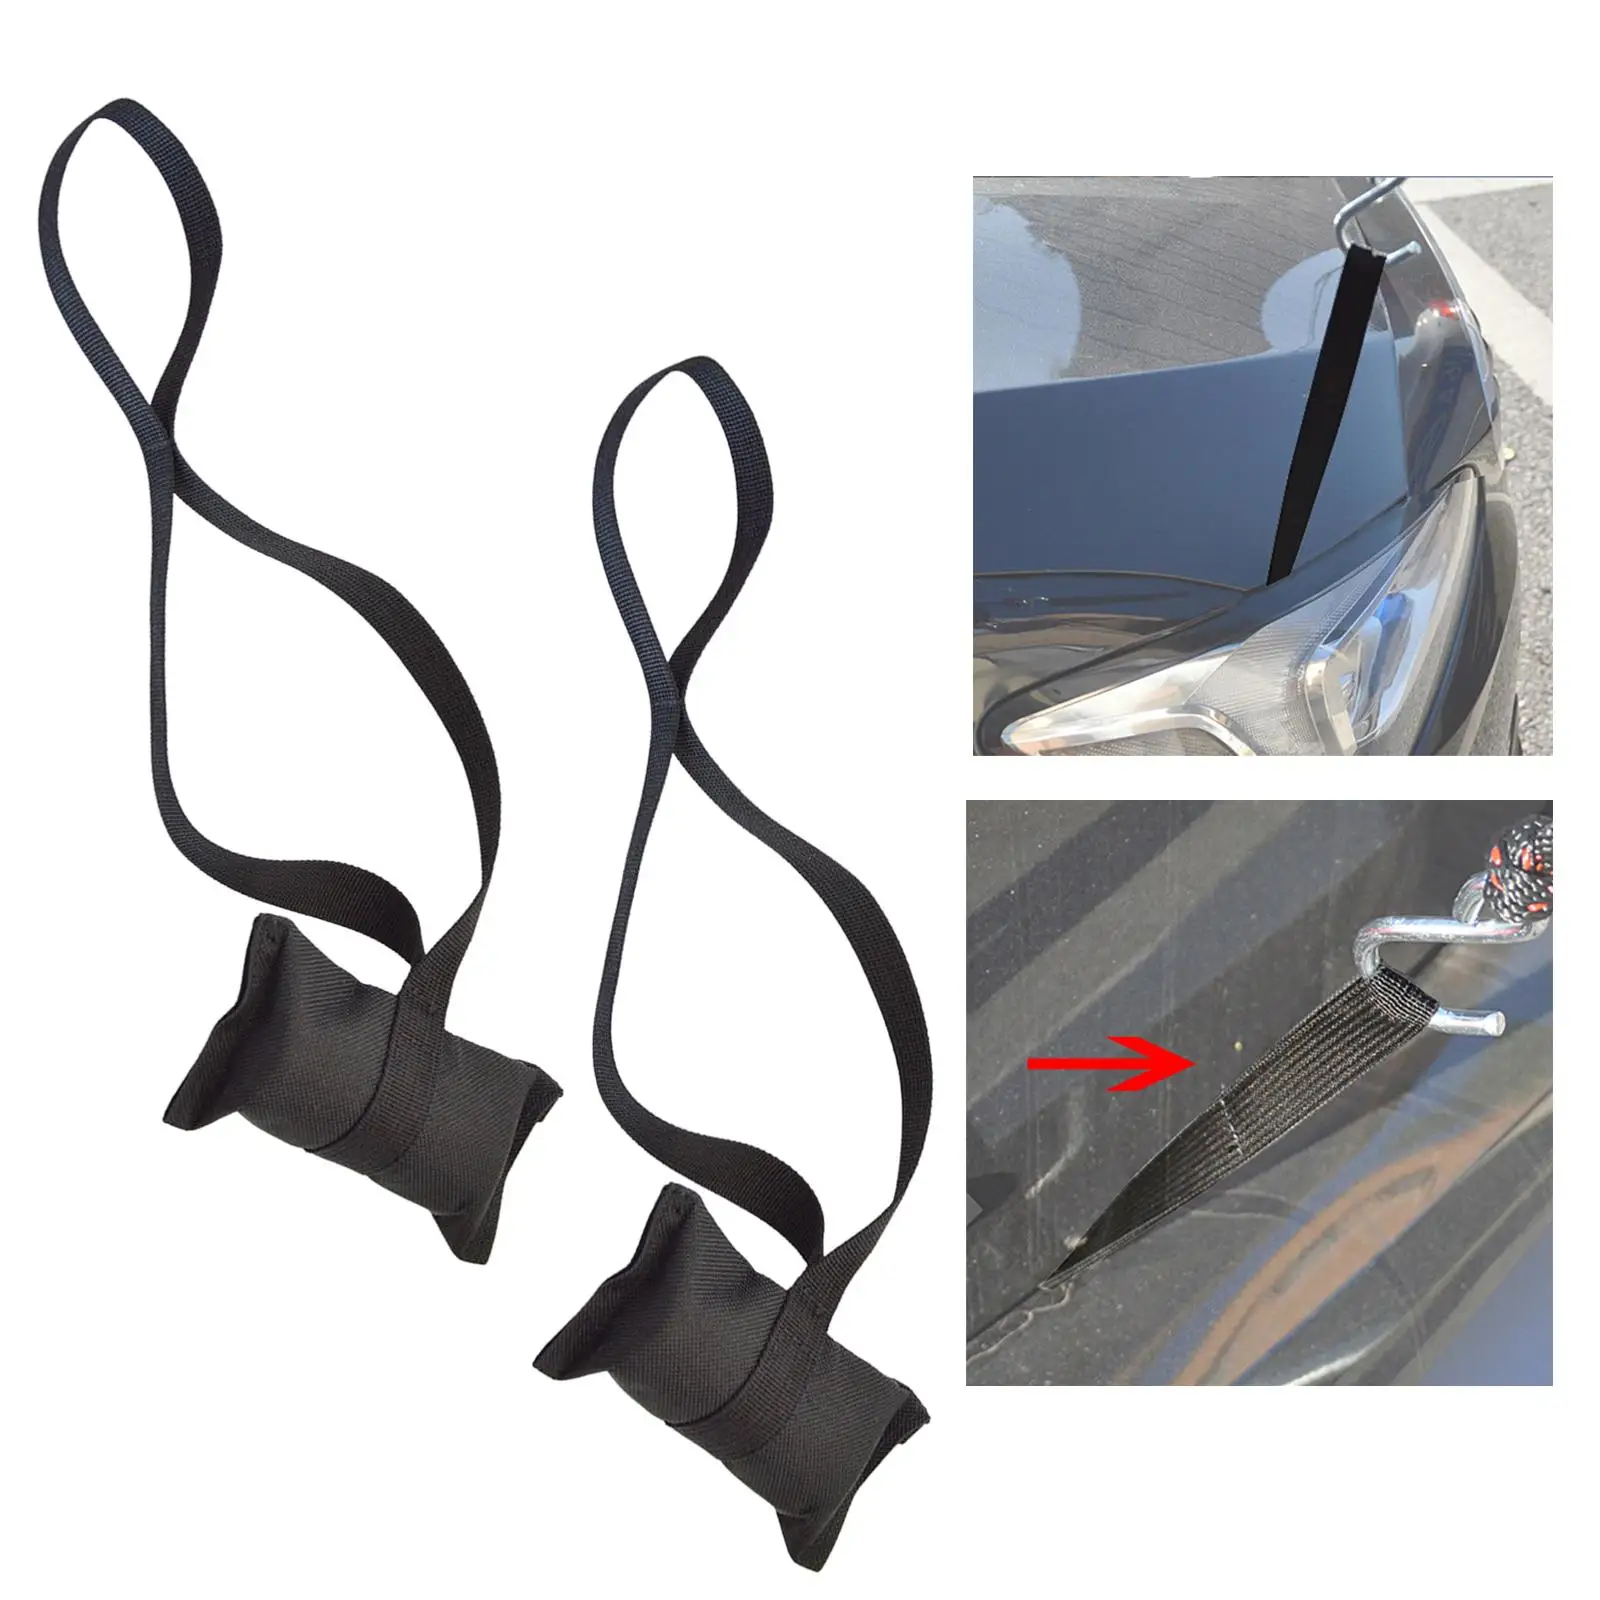 Canoe Anchors Tie Down Cars Hoods Easy Installation Quick Loops Disassembly for